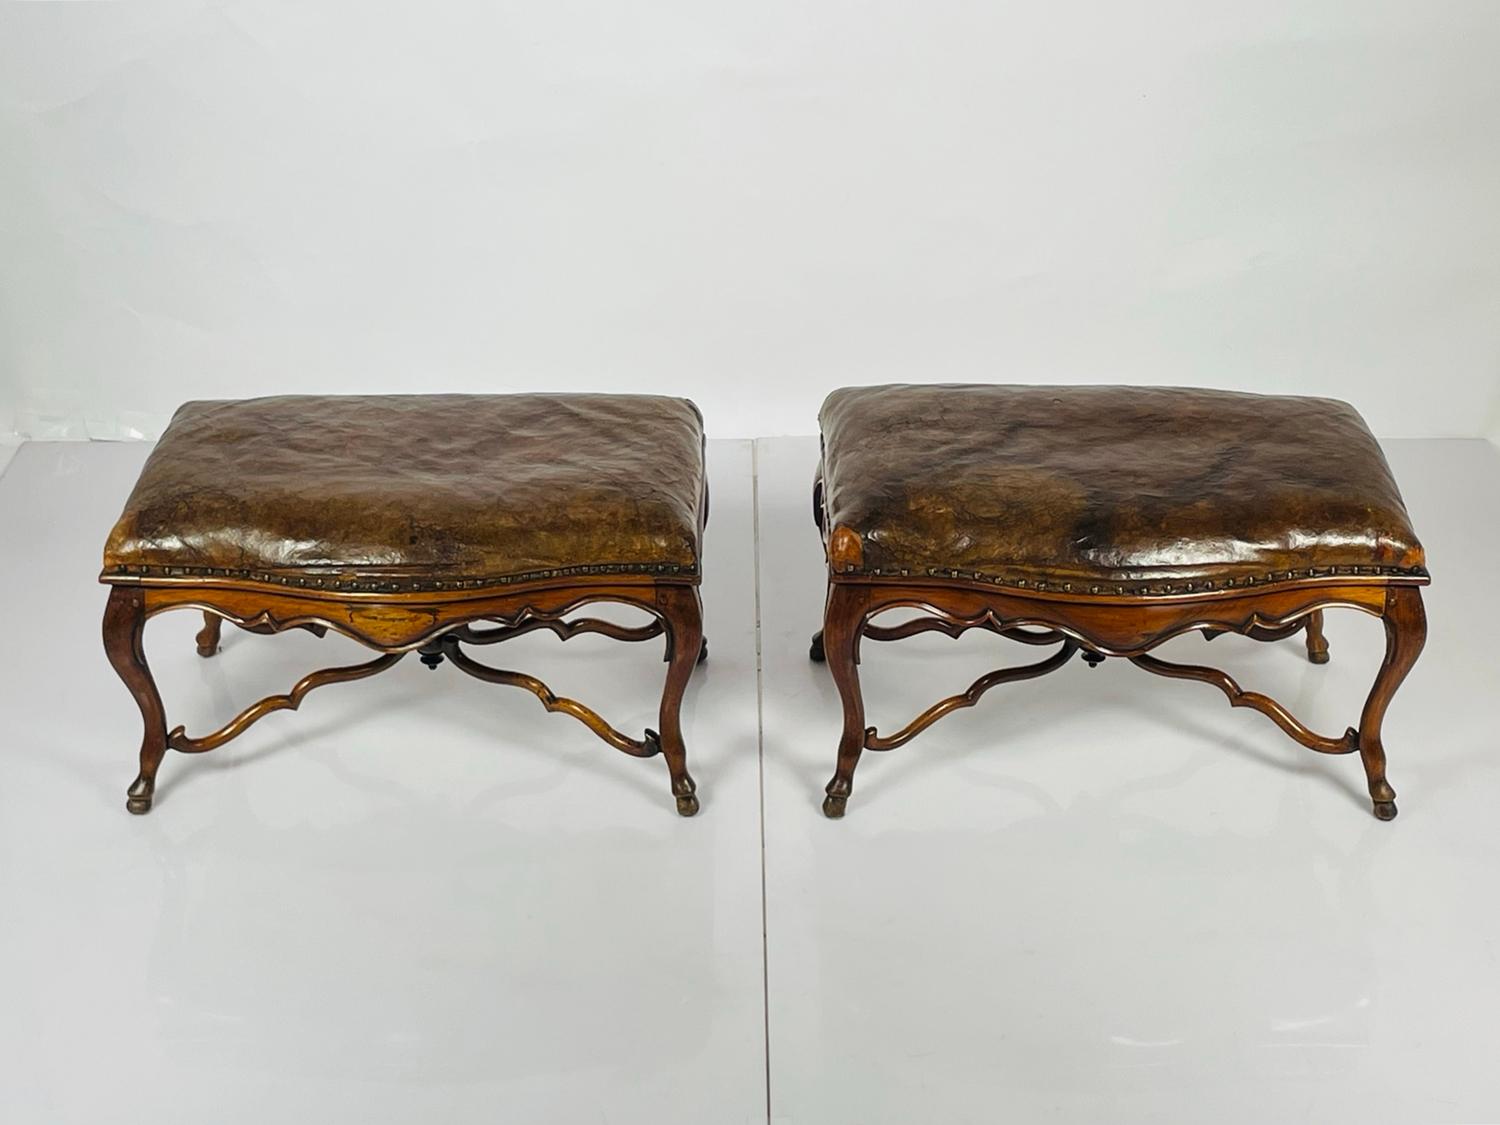 20th Century Pair of Antique Benches in Mahogany & Leather, Made in France